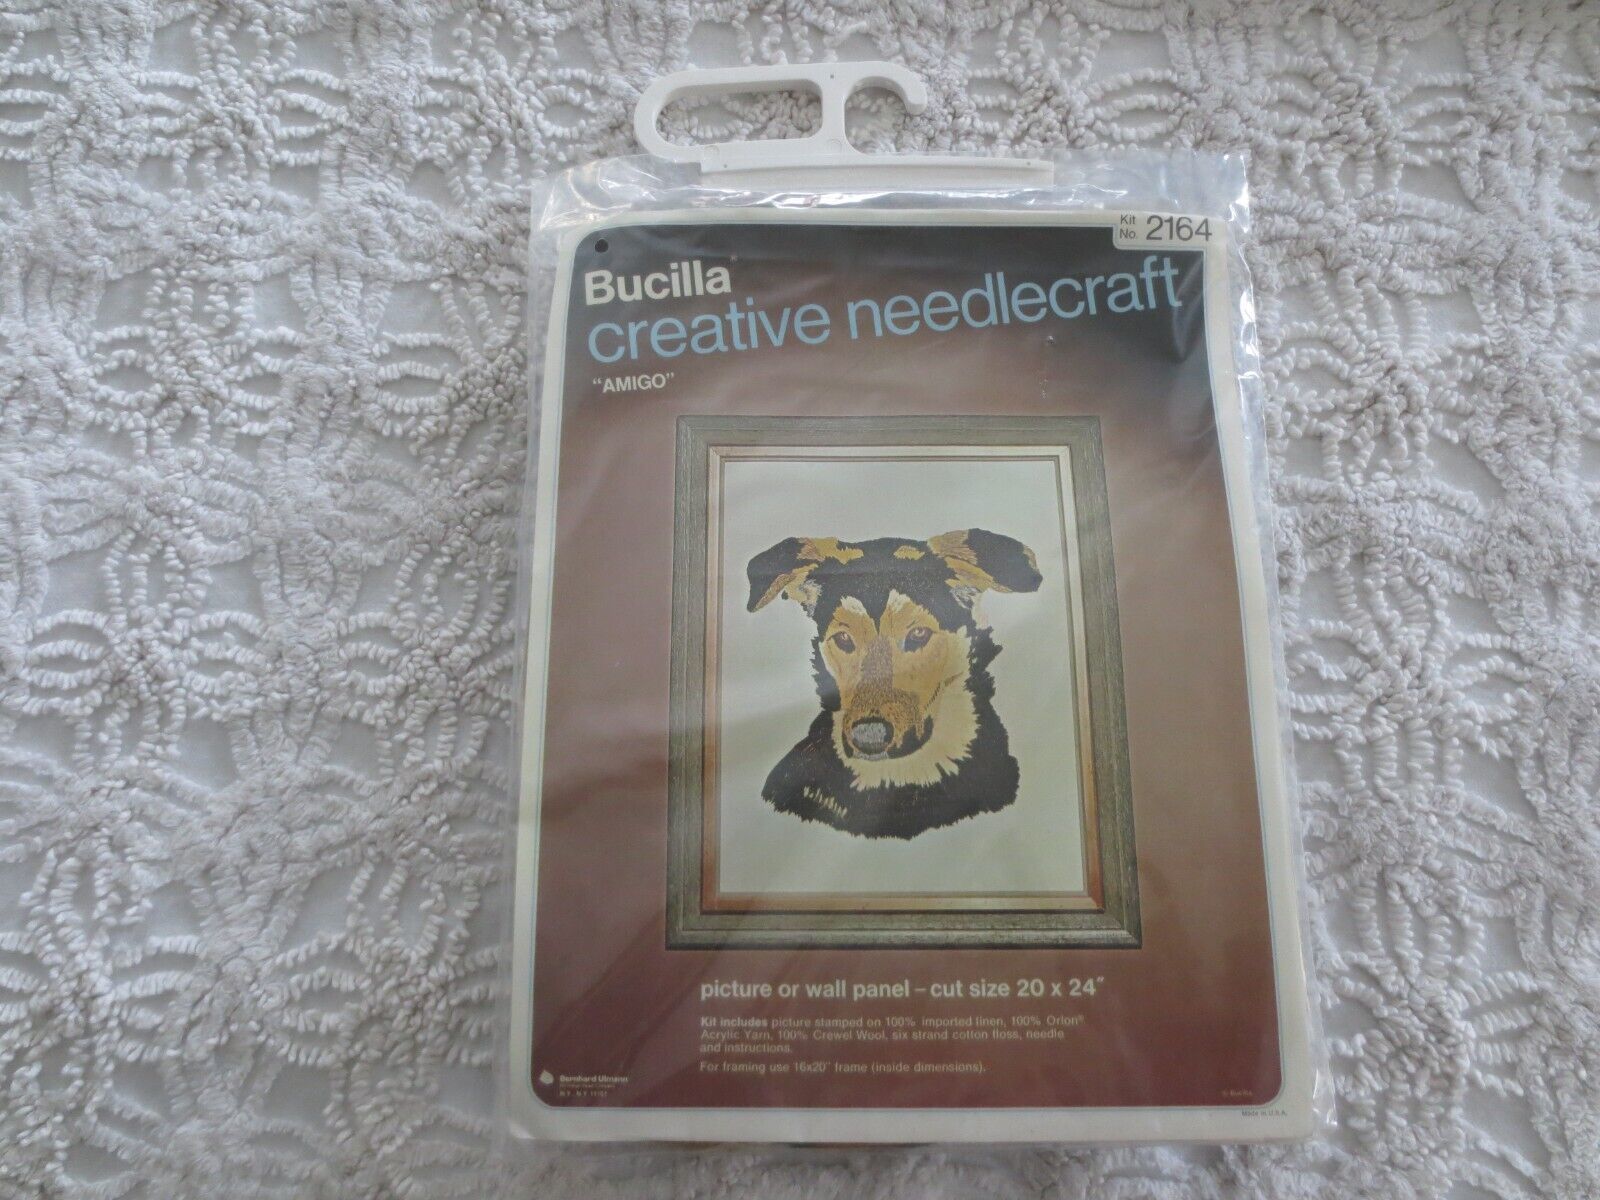 Primary image for NOS Bucilla "AMIGO" Crewel Embroidery PICTURE KIT #2164 - Cut Size 20" x 24"